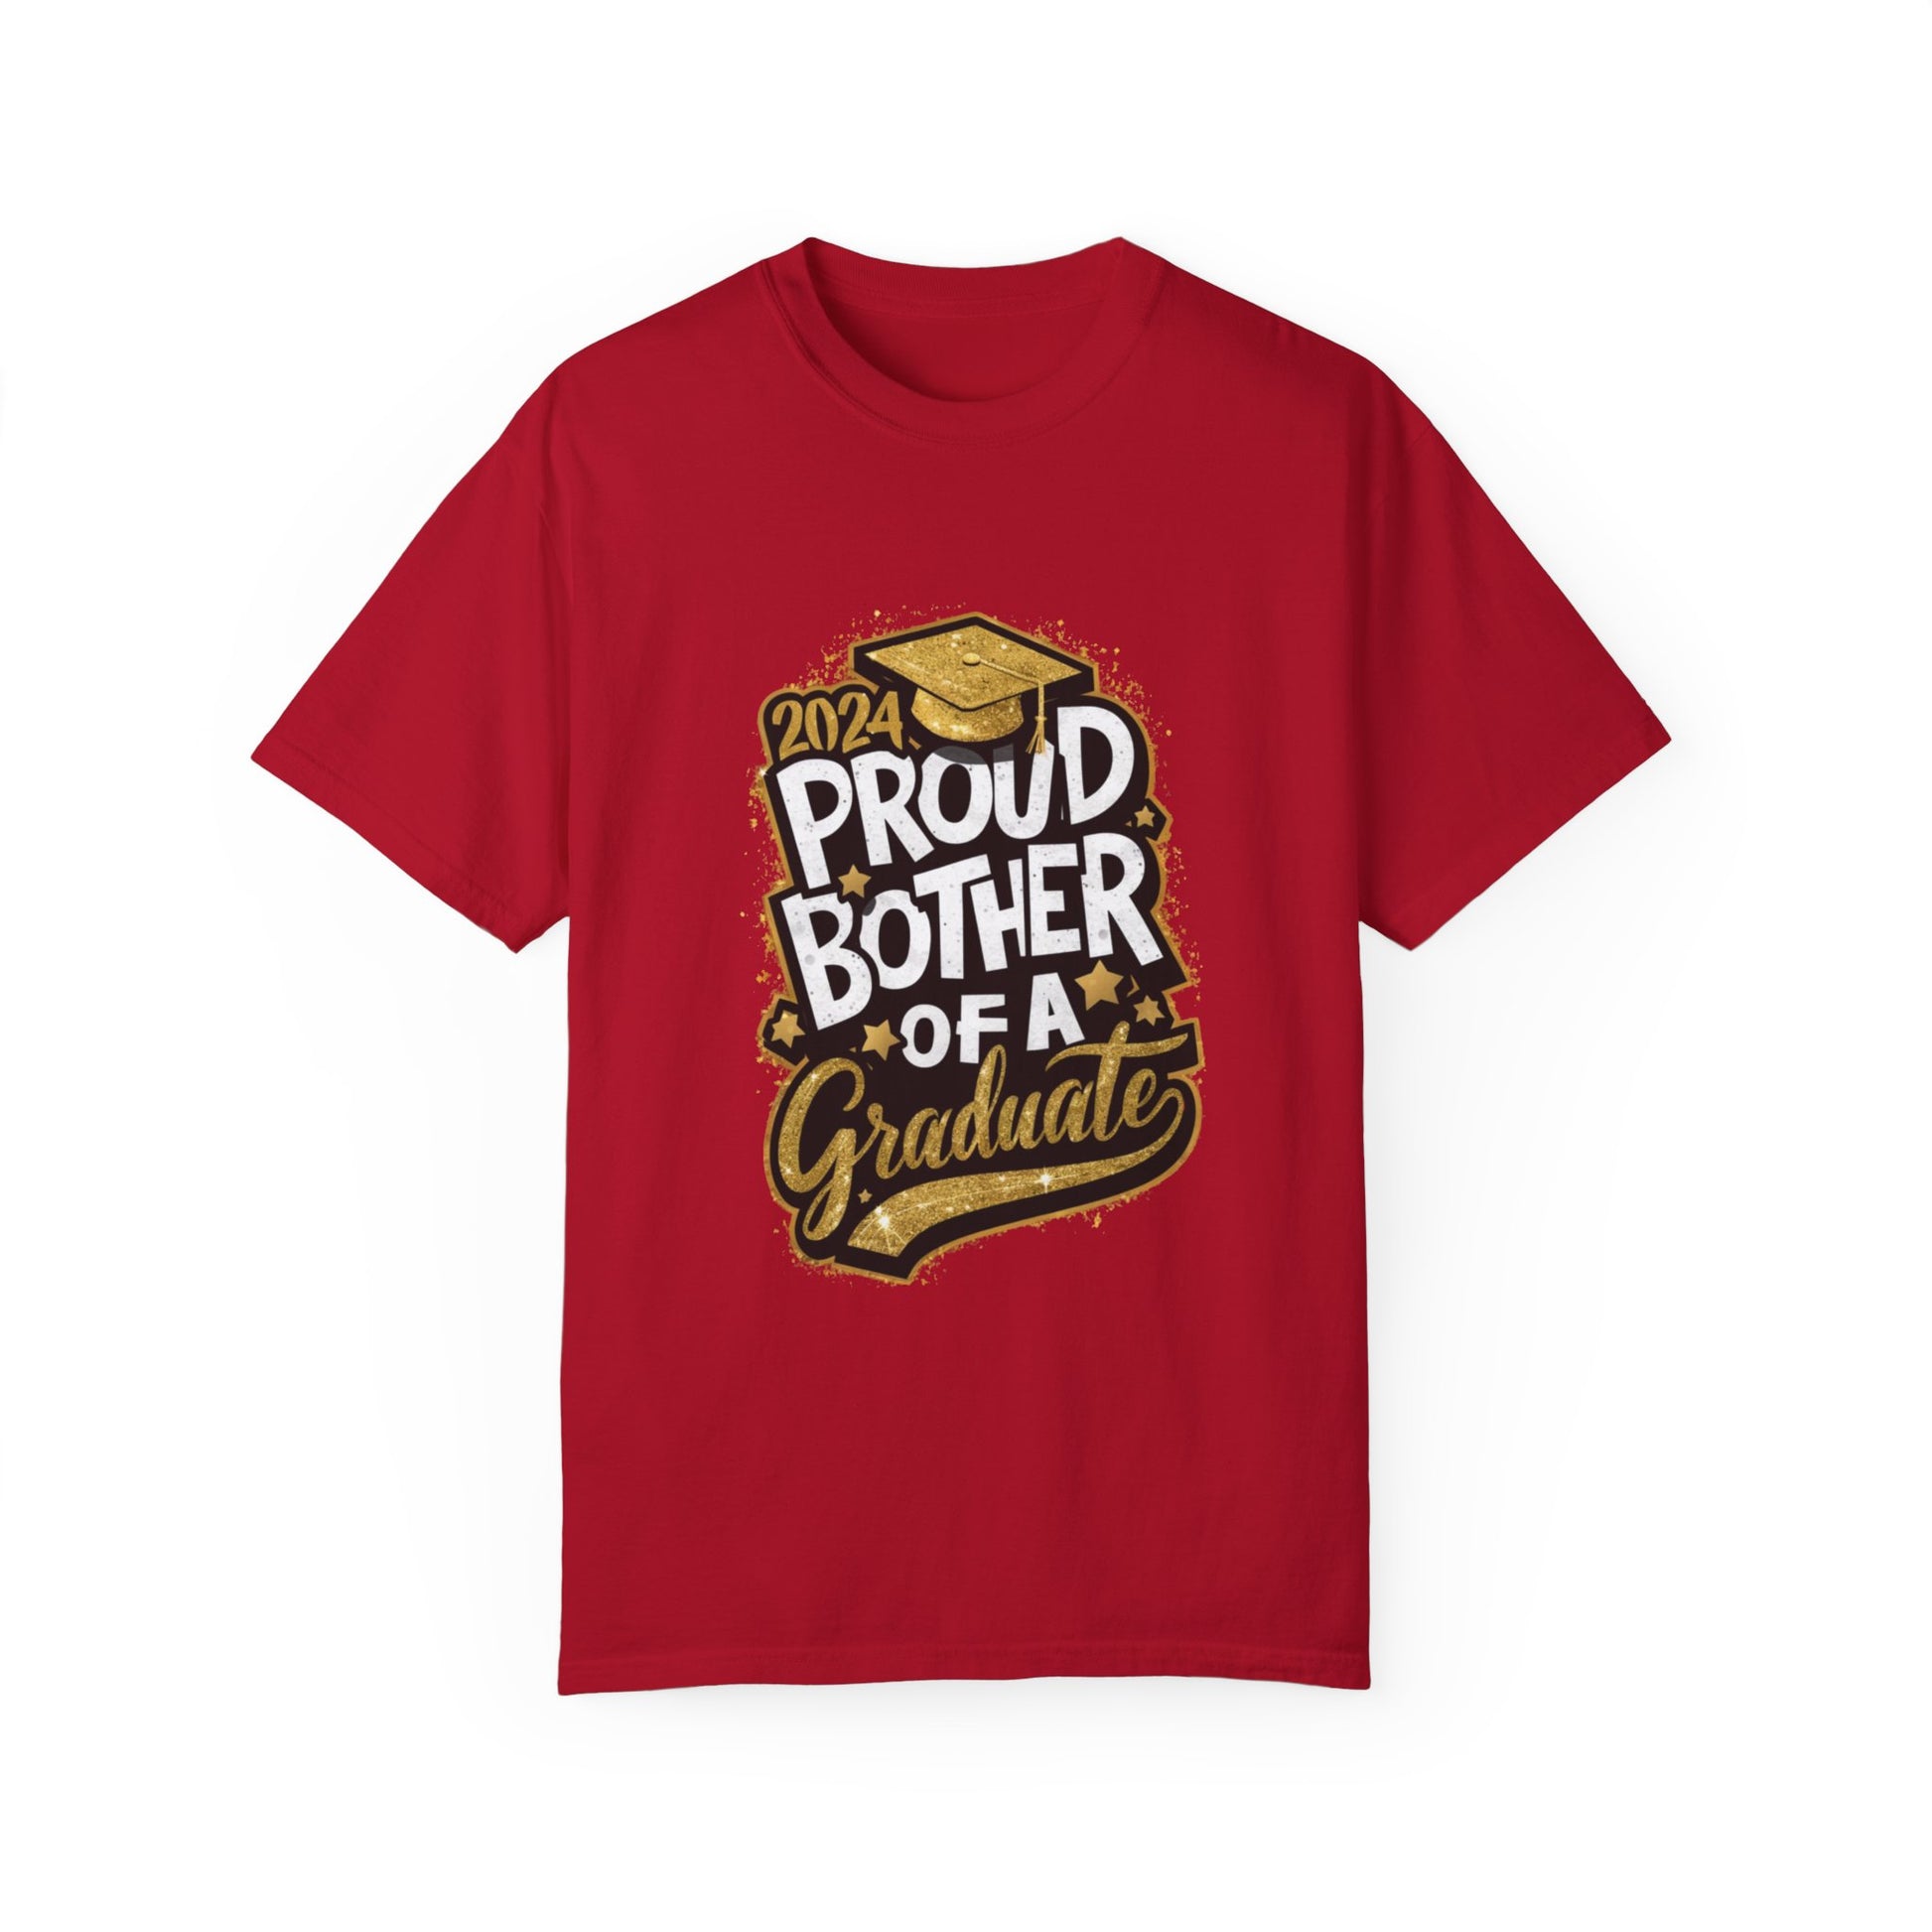 Proud Brother of a 2024 Graduate Unisex Garment-dyed T-shirt Cotton Funny Humorous Graphic Soft Premium Unisex Men Women Red T-shirt Birthday Gift-2